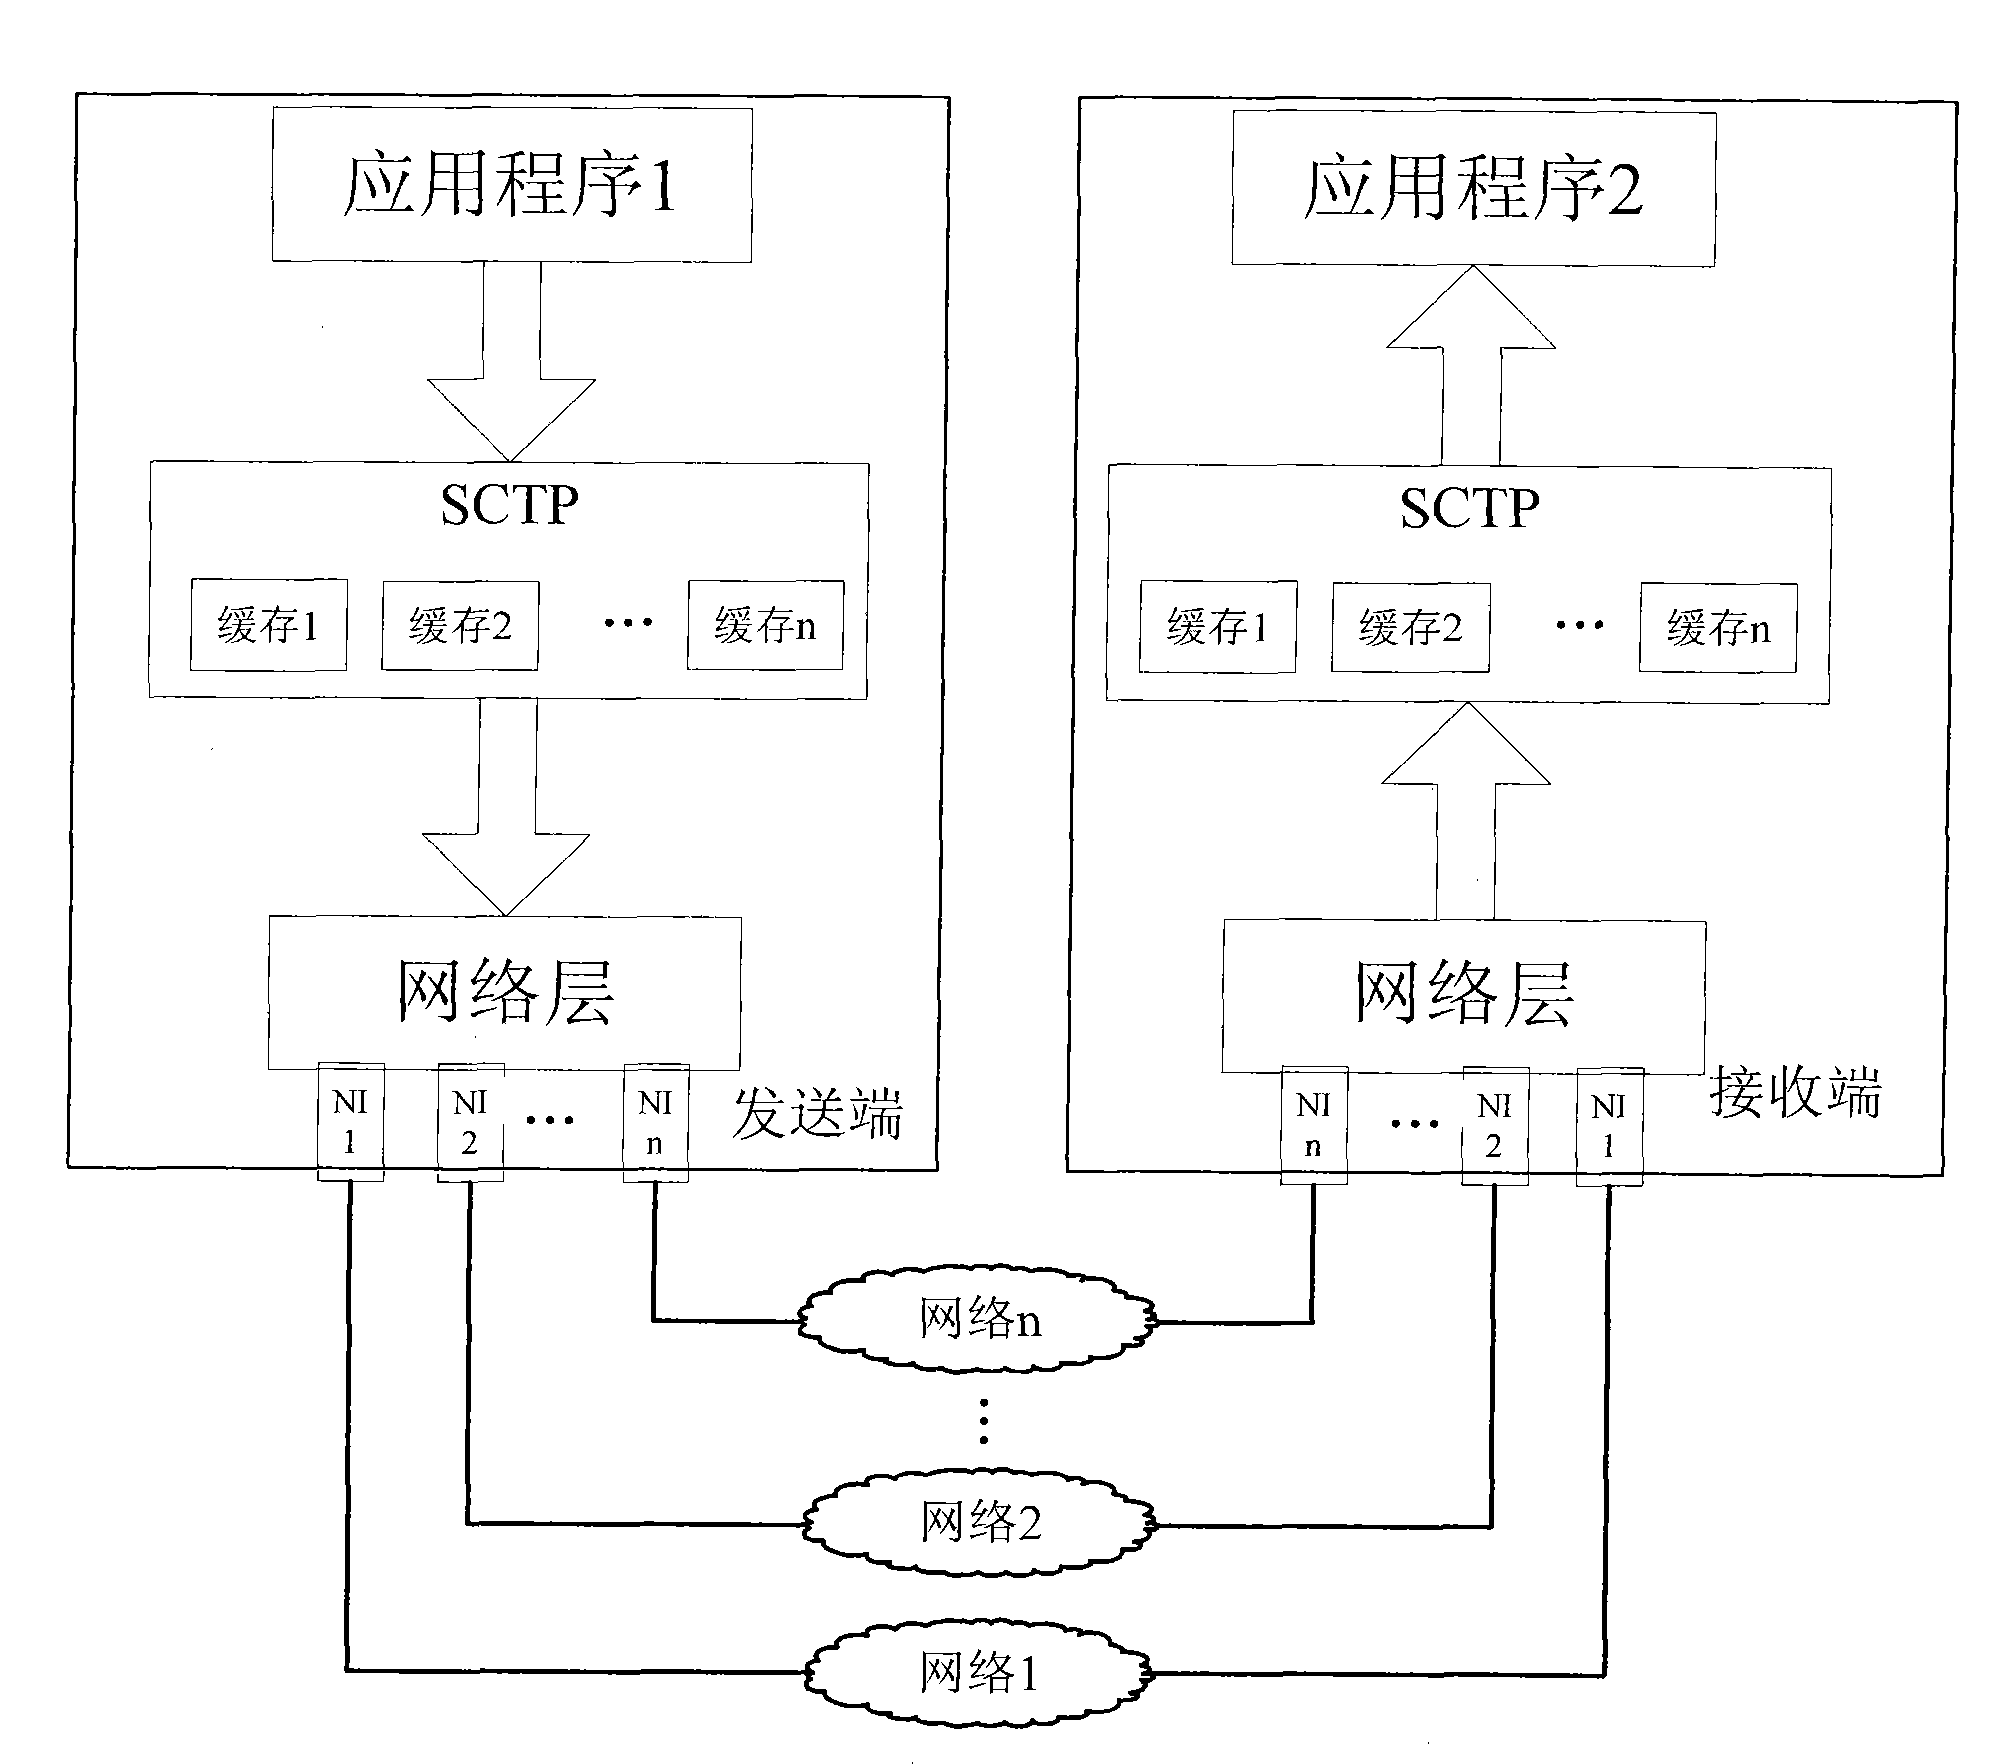 Data concurrency transmission method of multi-network interface device